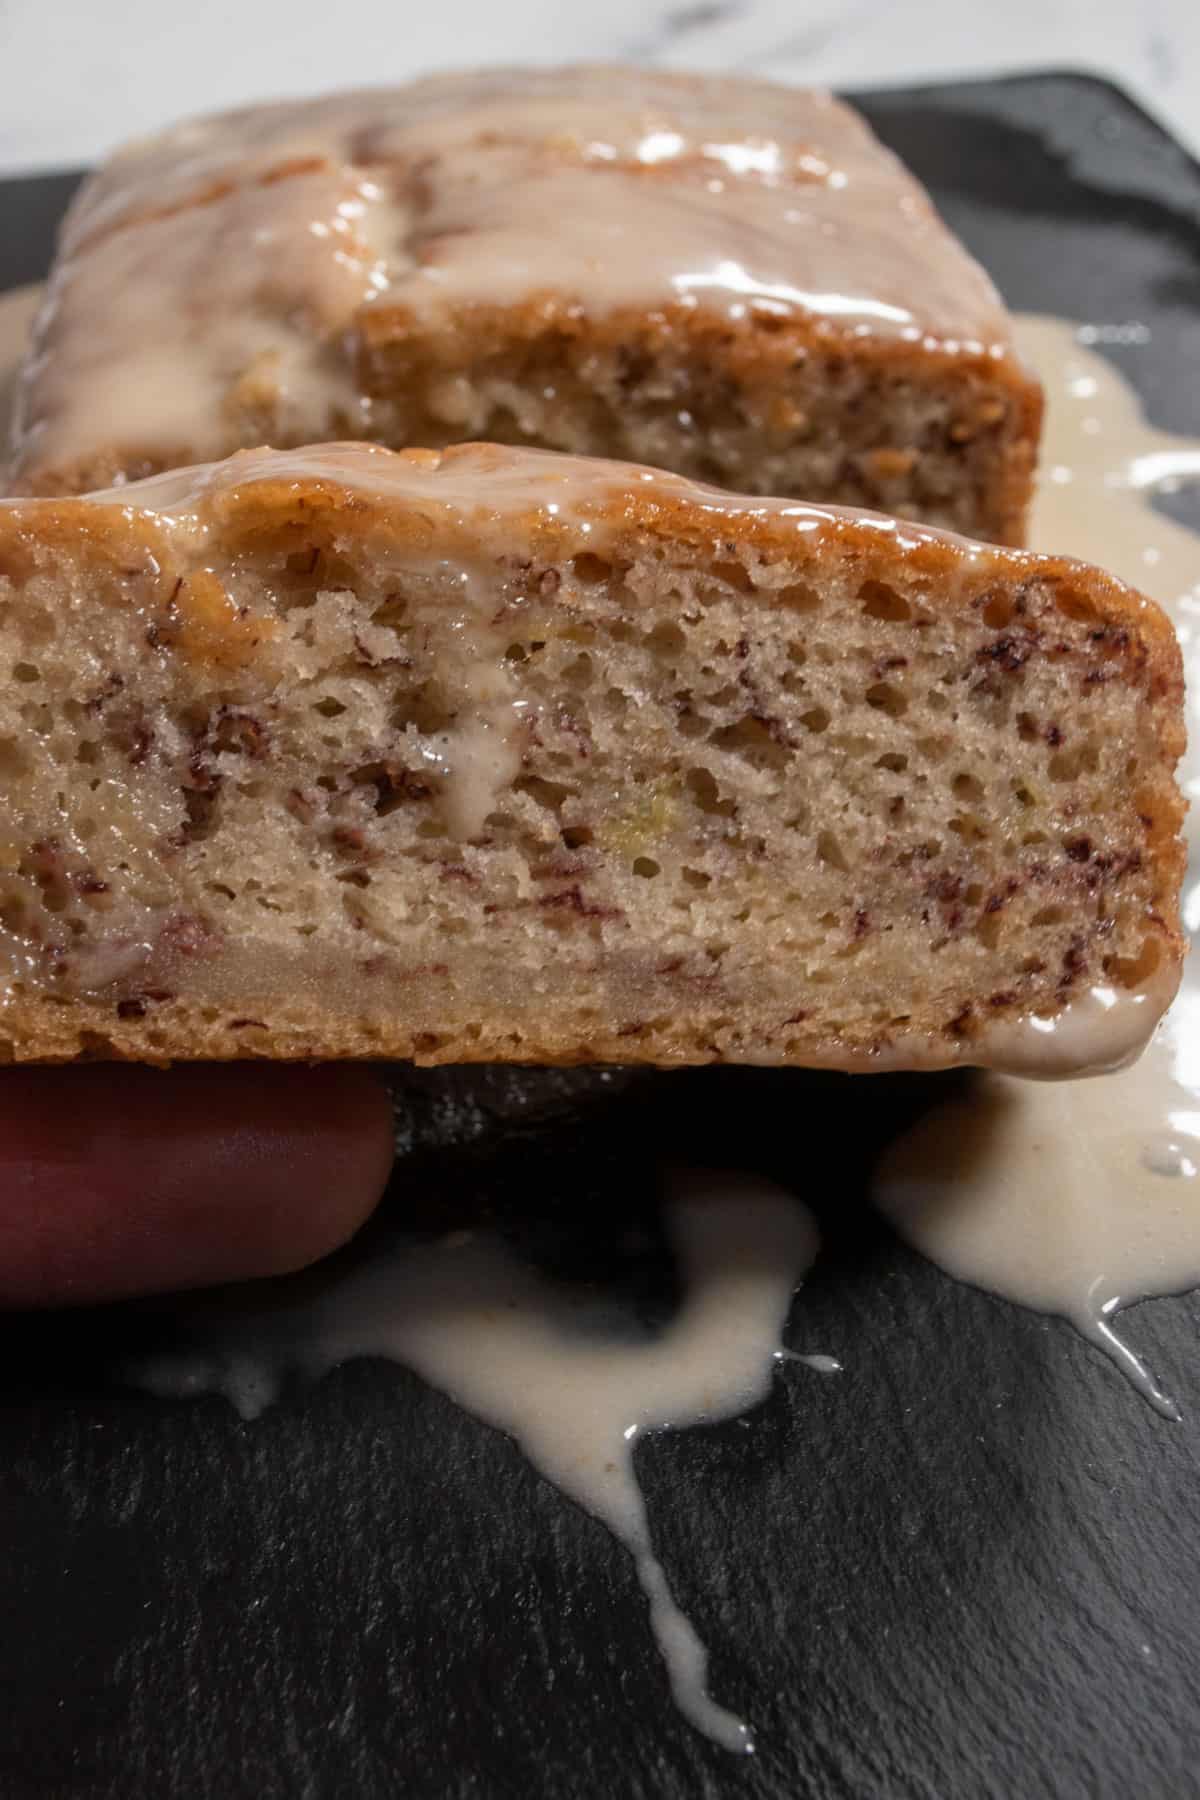 A moist, thick slice of banana cake being held by a hand. Glaze has dripped down the side of the cake.